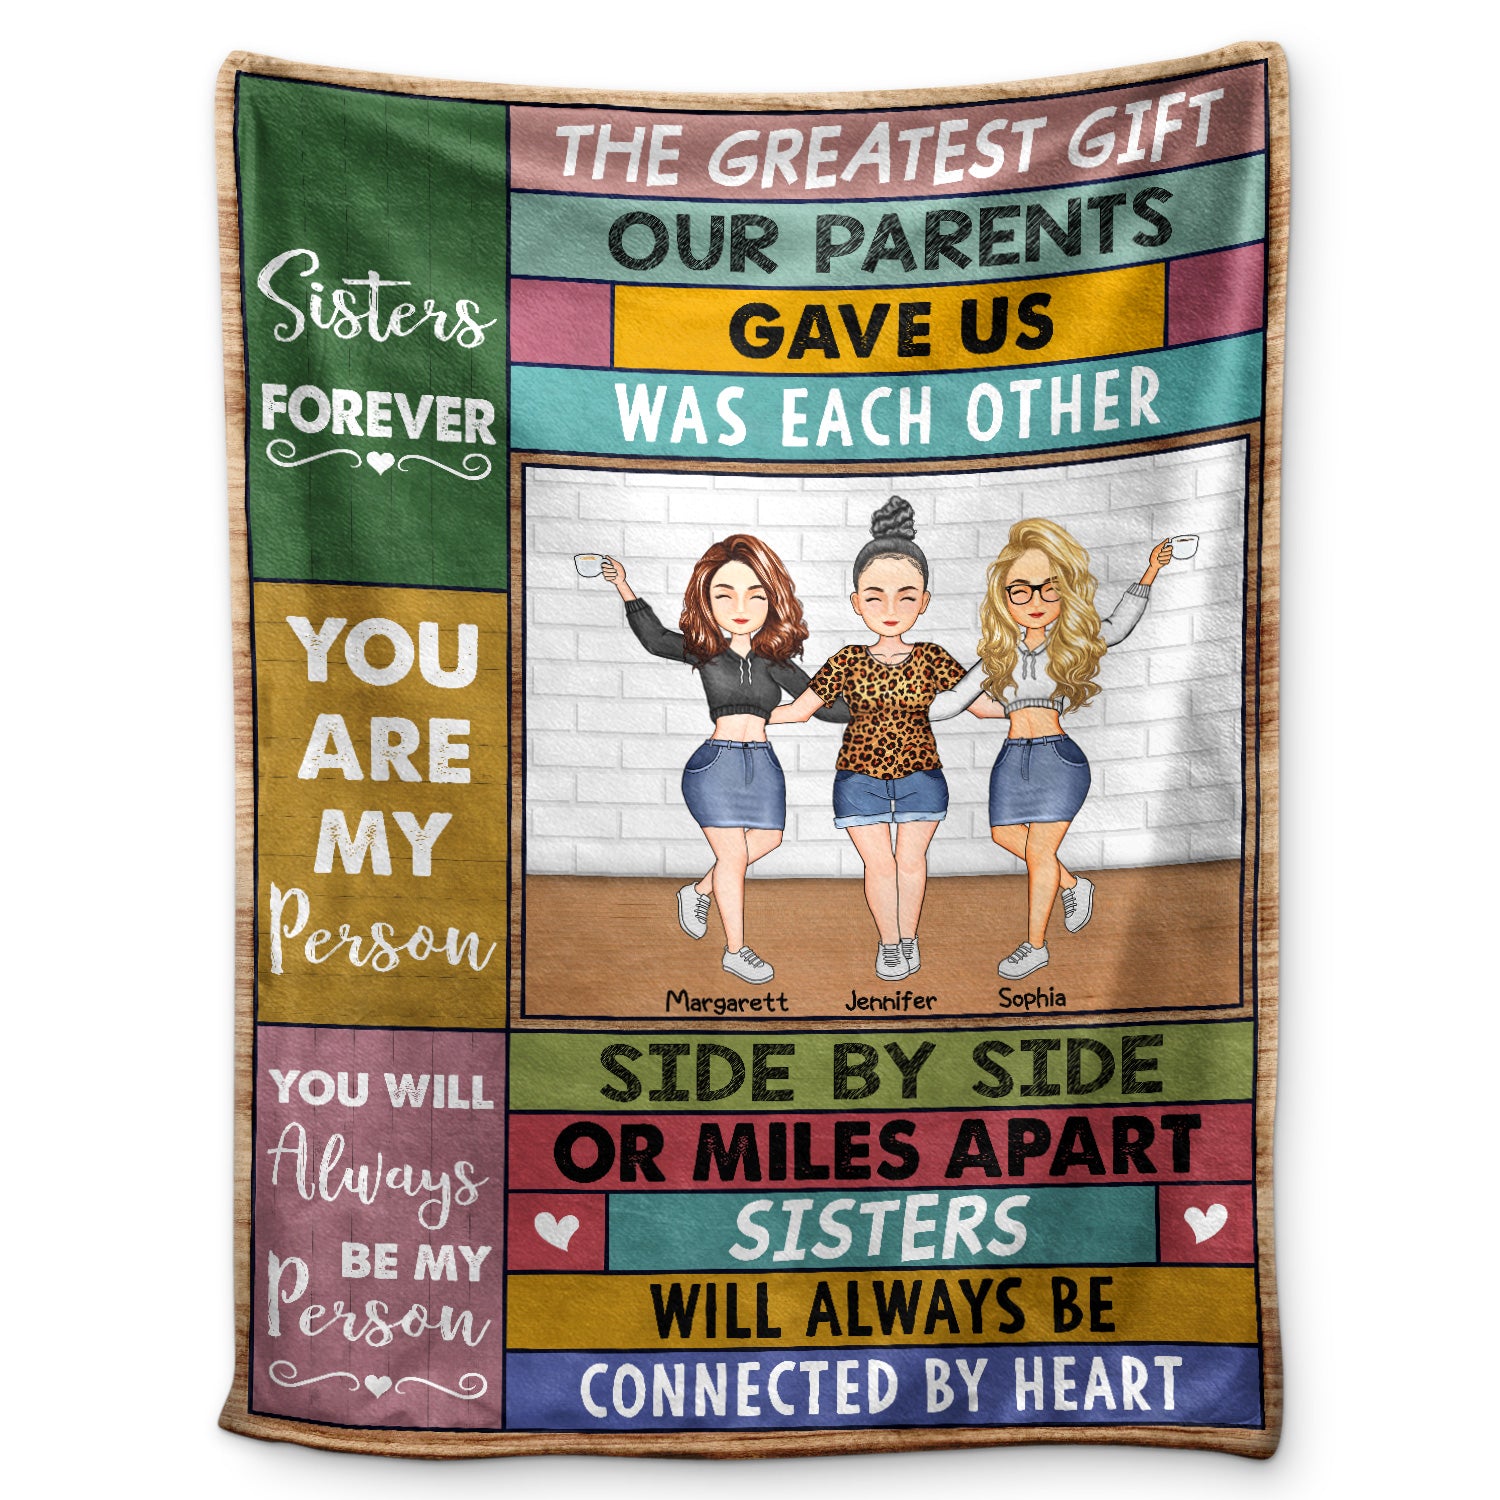 Side By Side Or Miles Apart Sisters And Brothers - Gift For Siblings And Family - Personalized Custom Fleece Blanket